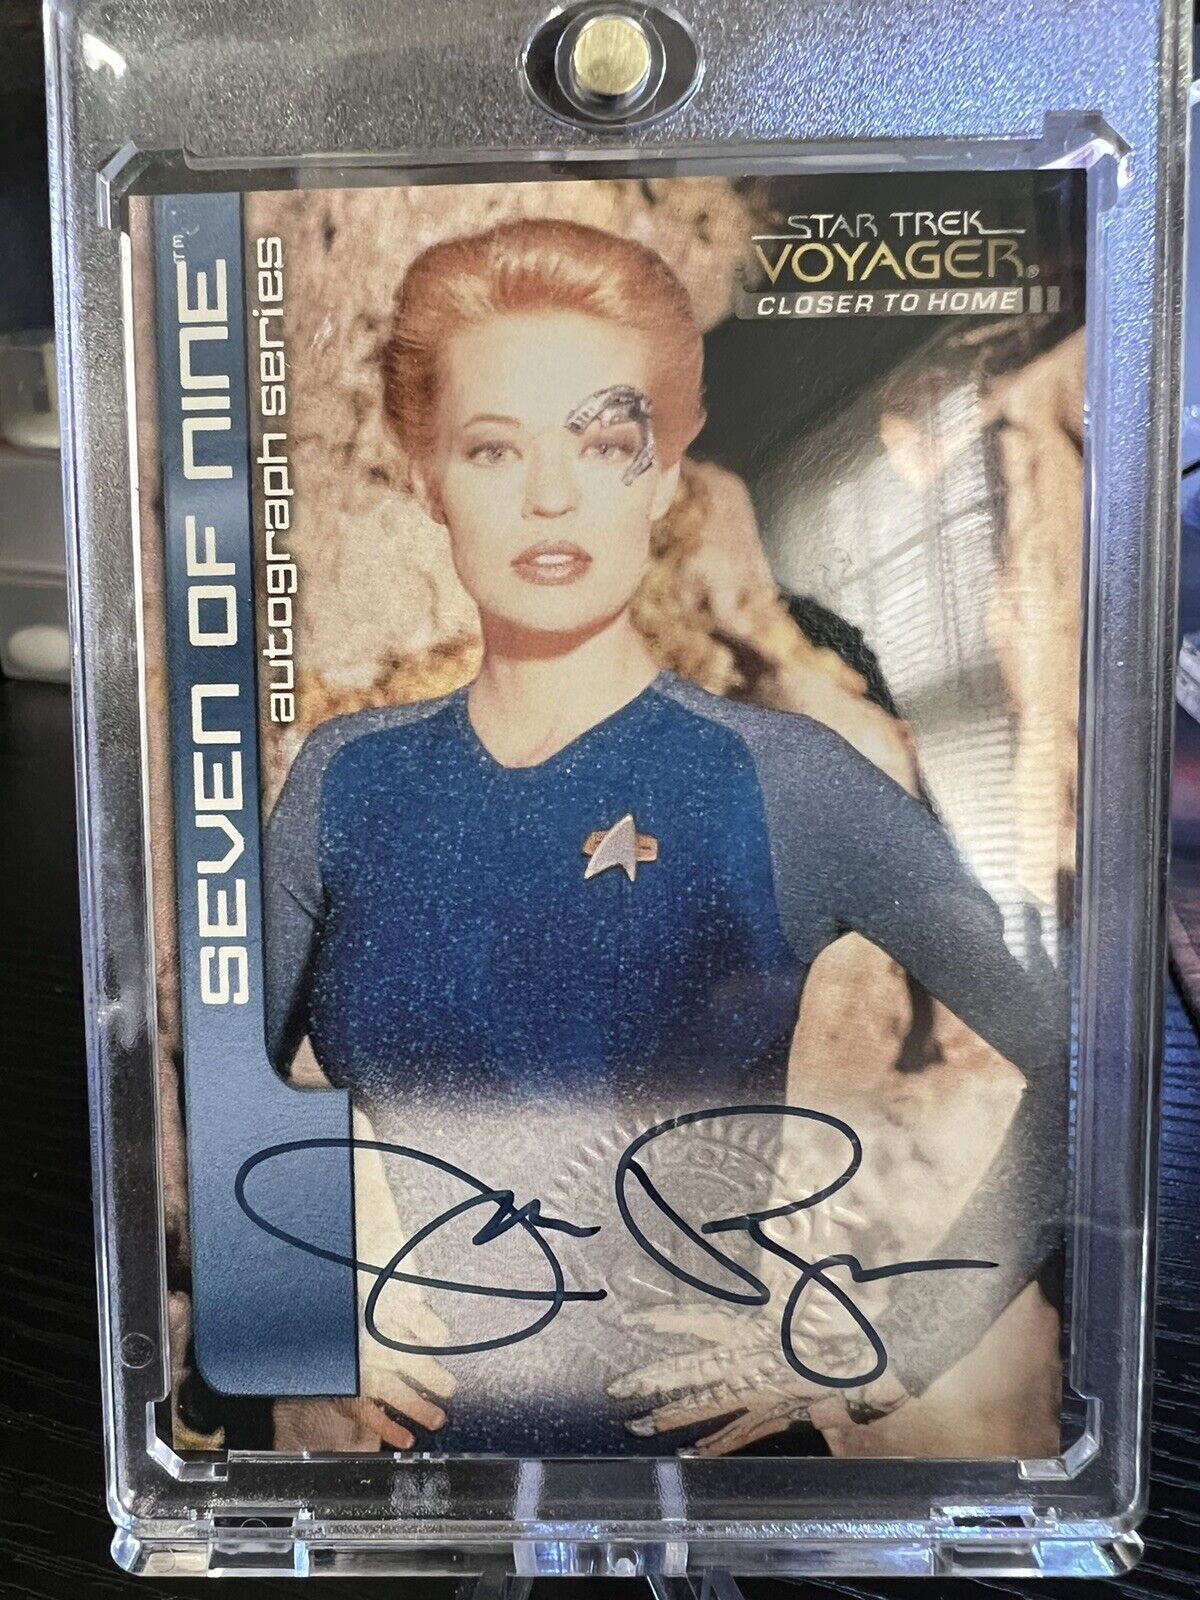 Star Trek Voyager Closer To Home Autograph card A7 Jeri Ryan as Seven of Nine